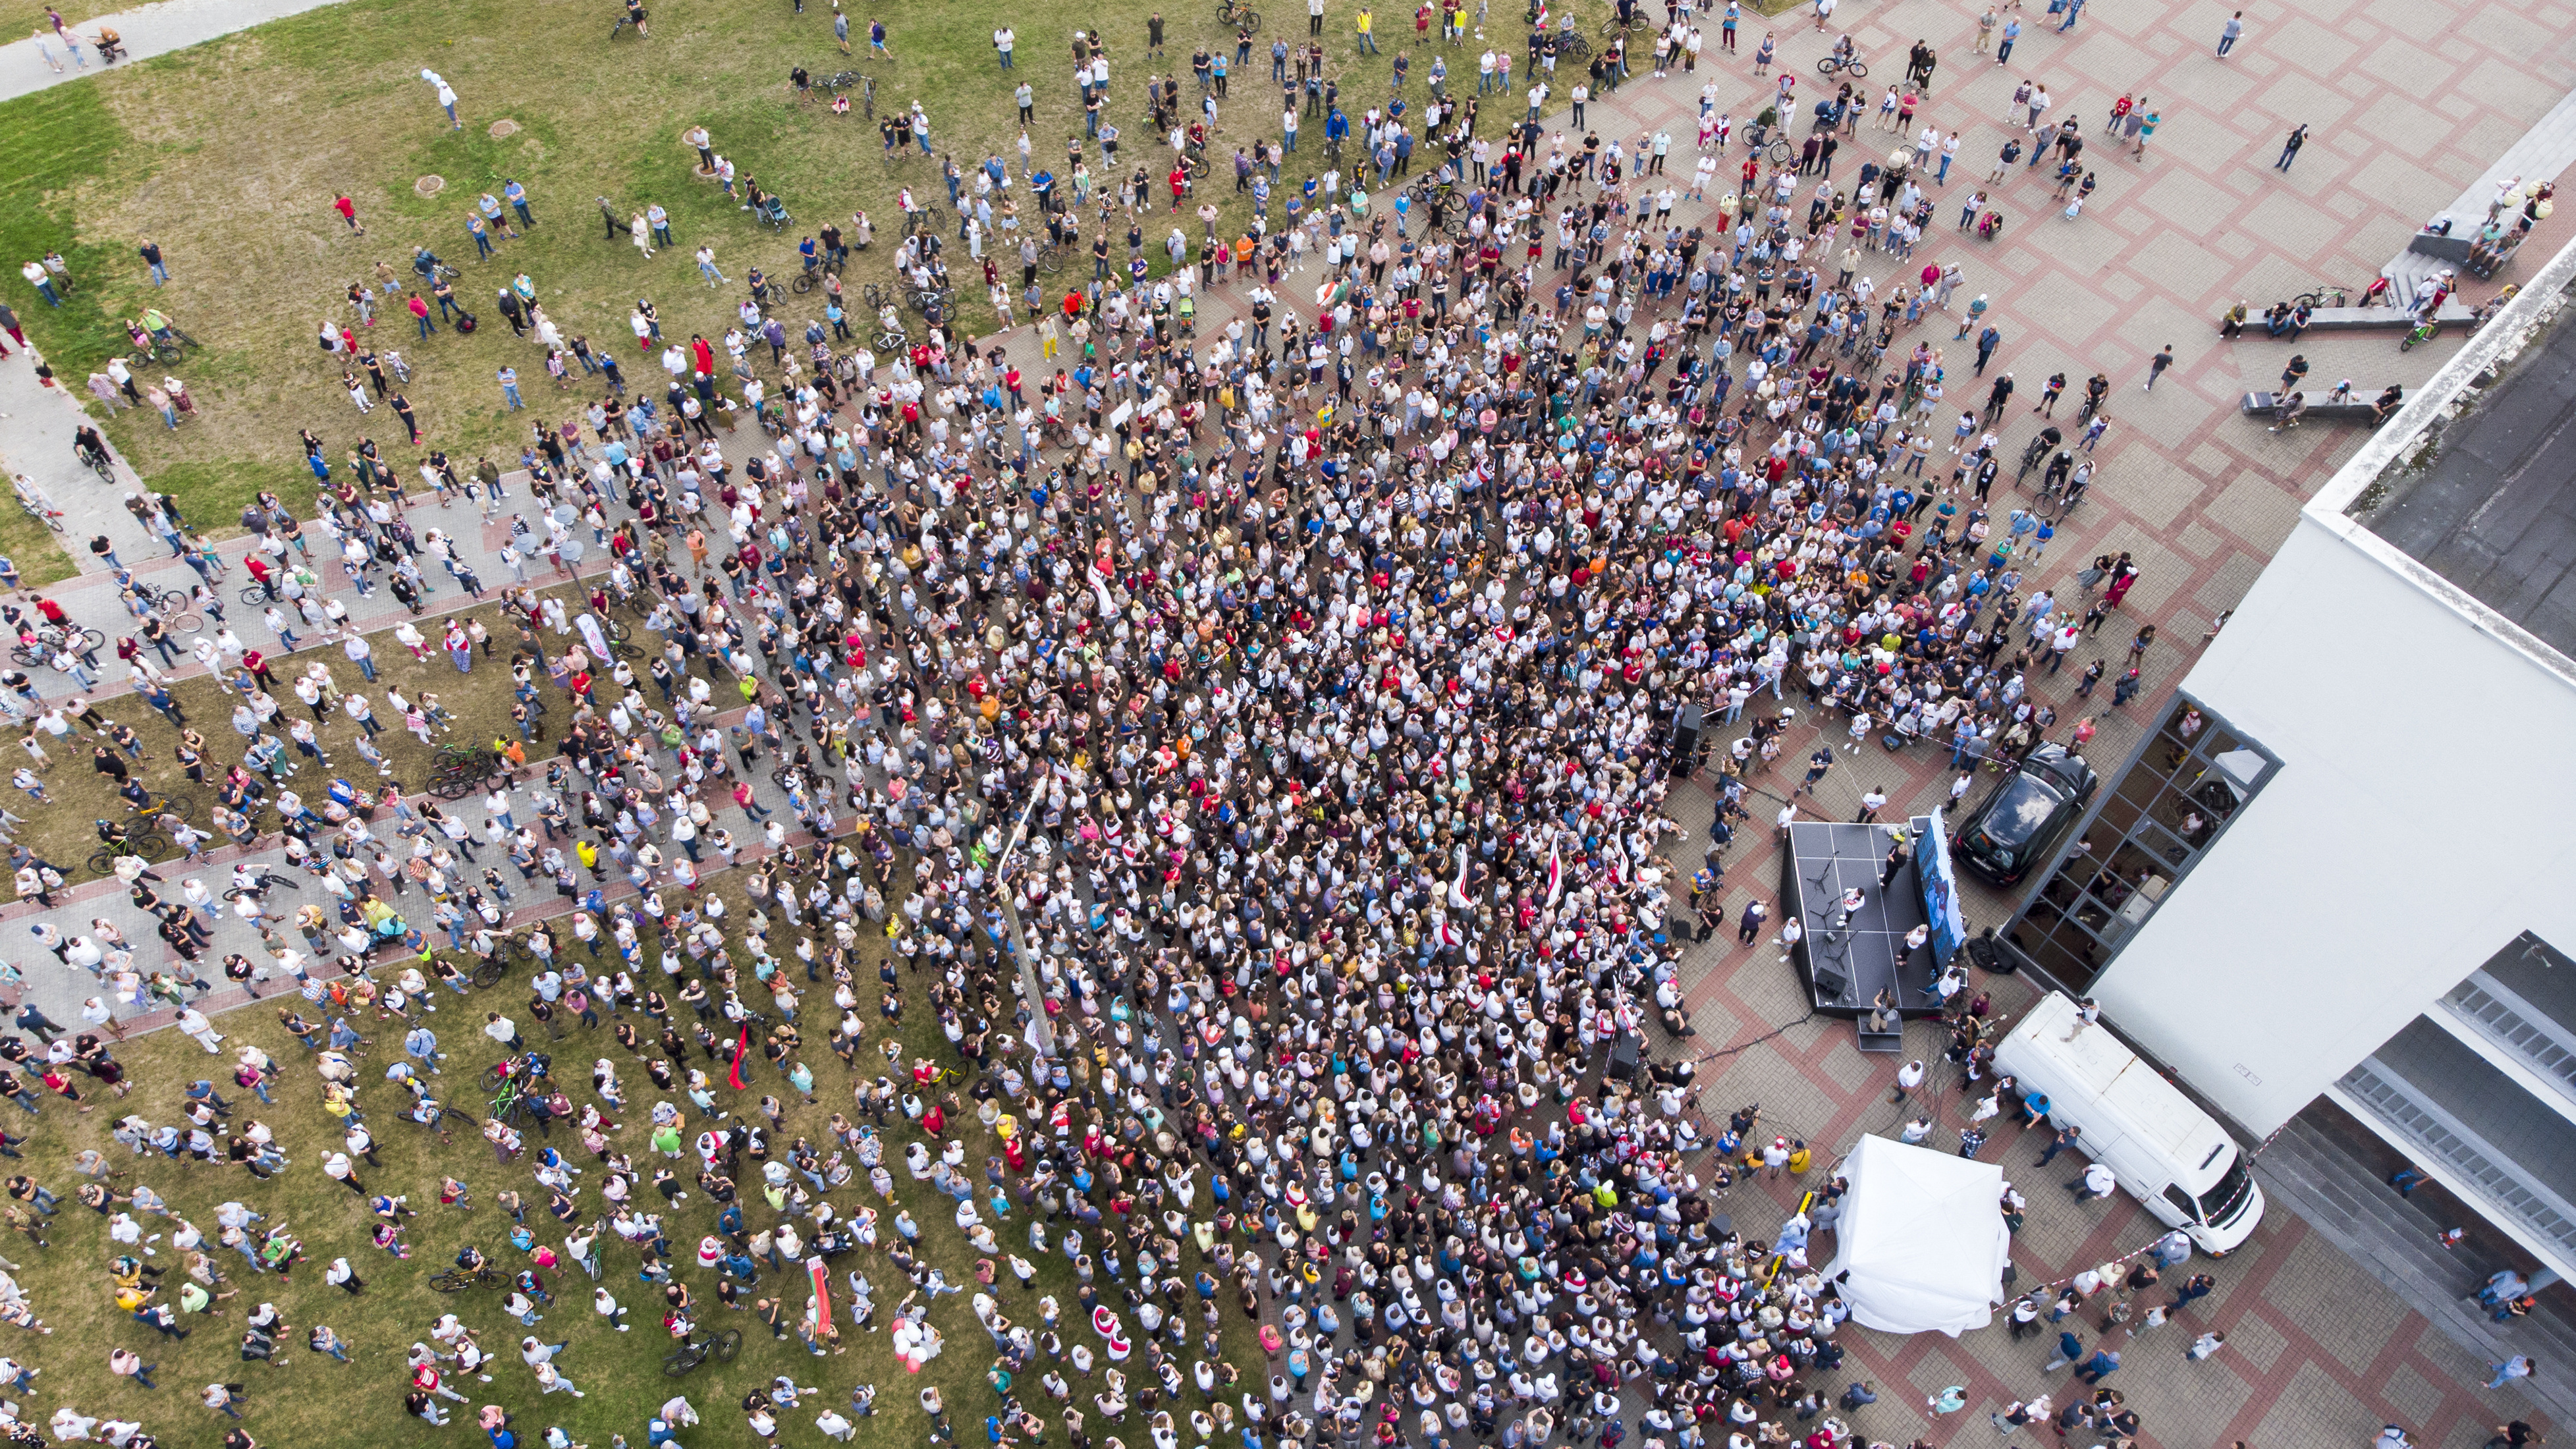 A crowd of people